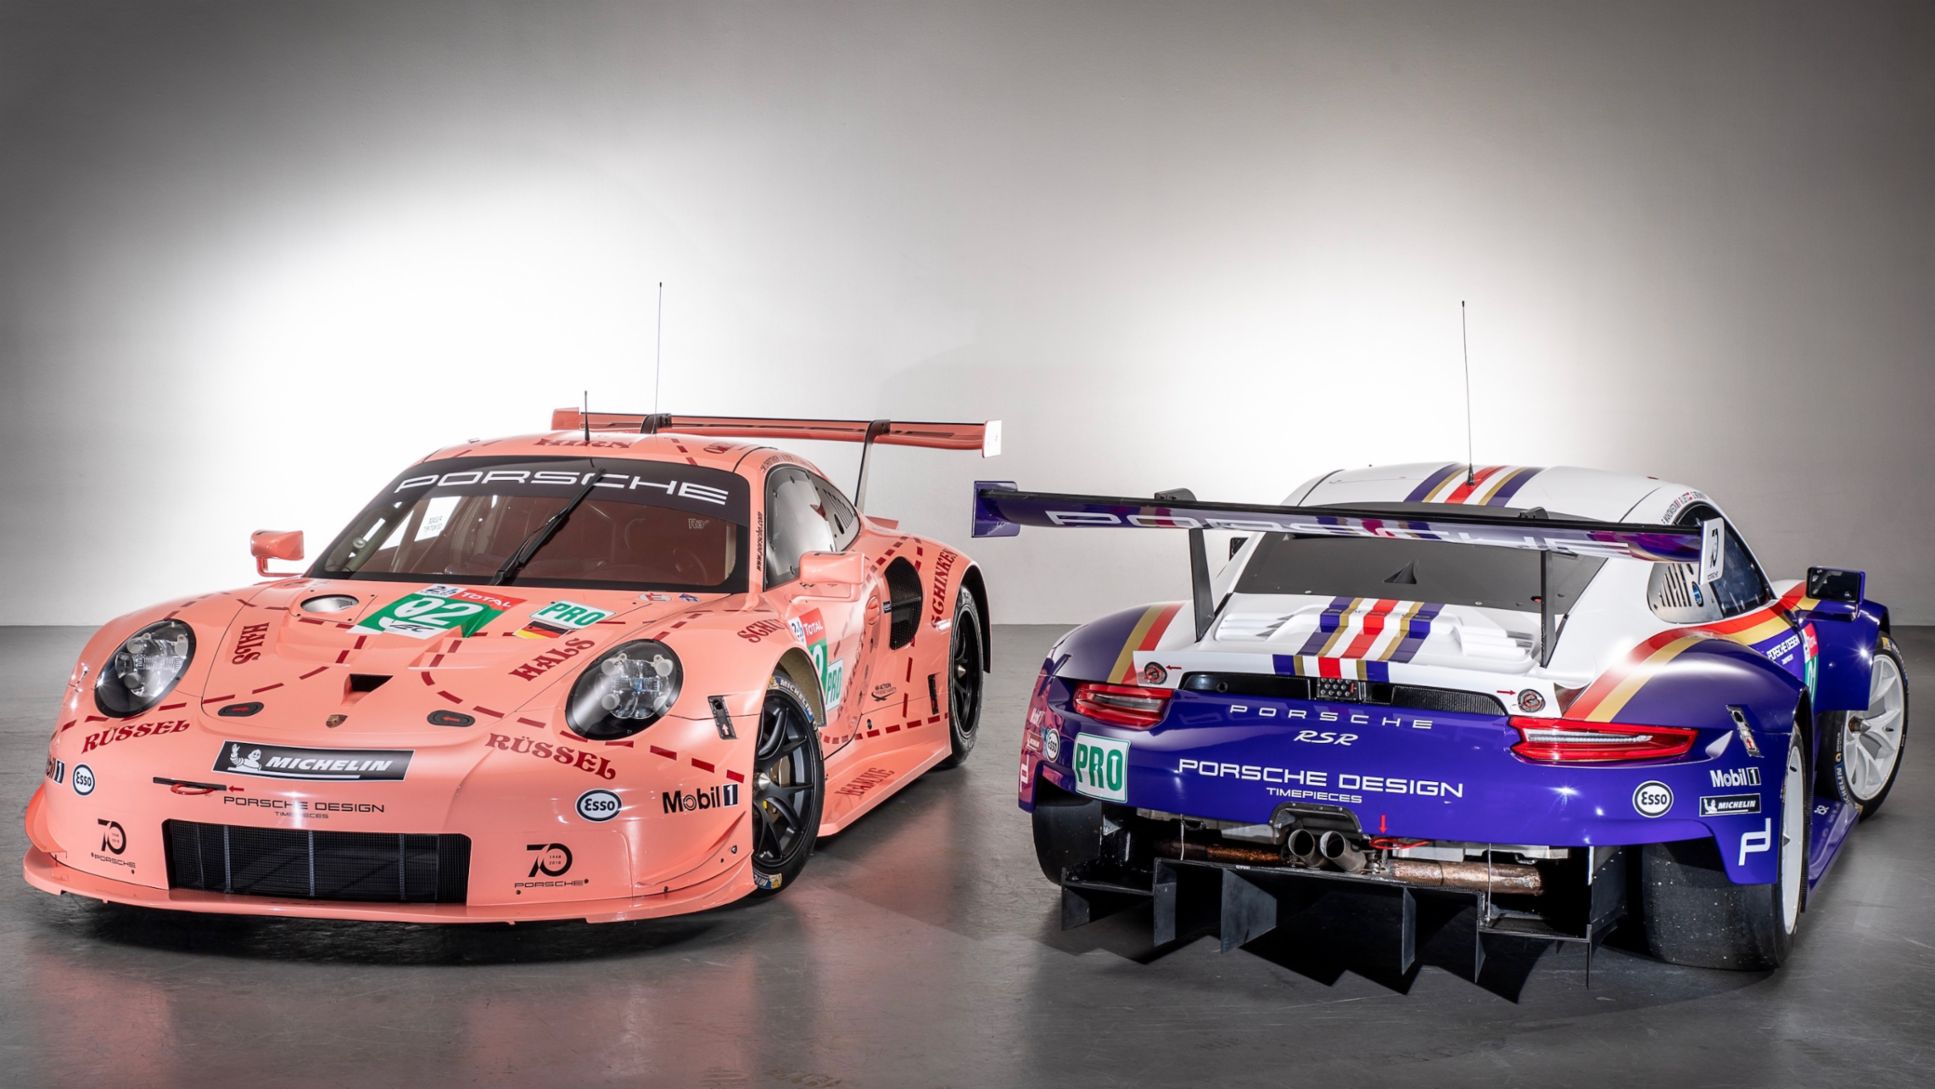 Two Porsche 911 Rsr Compete In Historic Livery